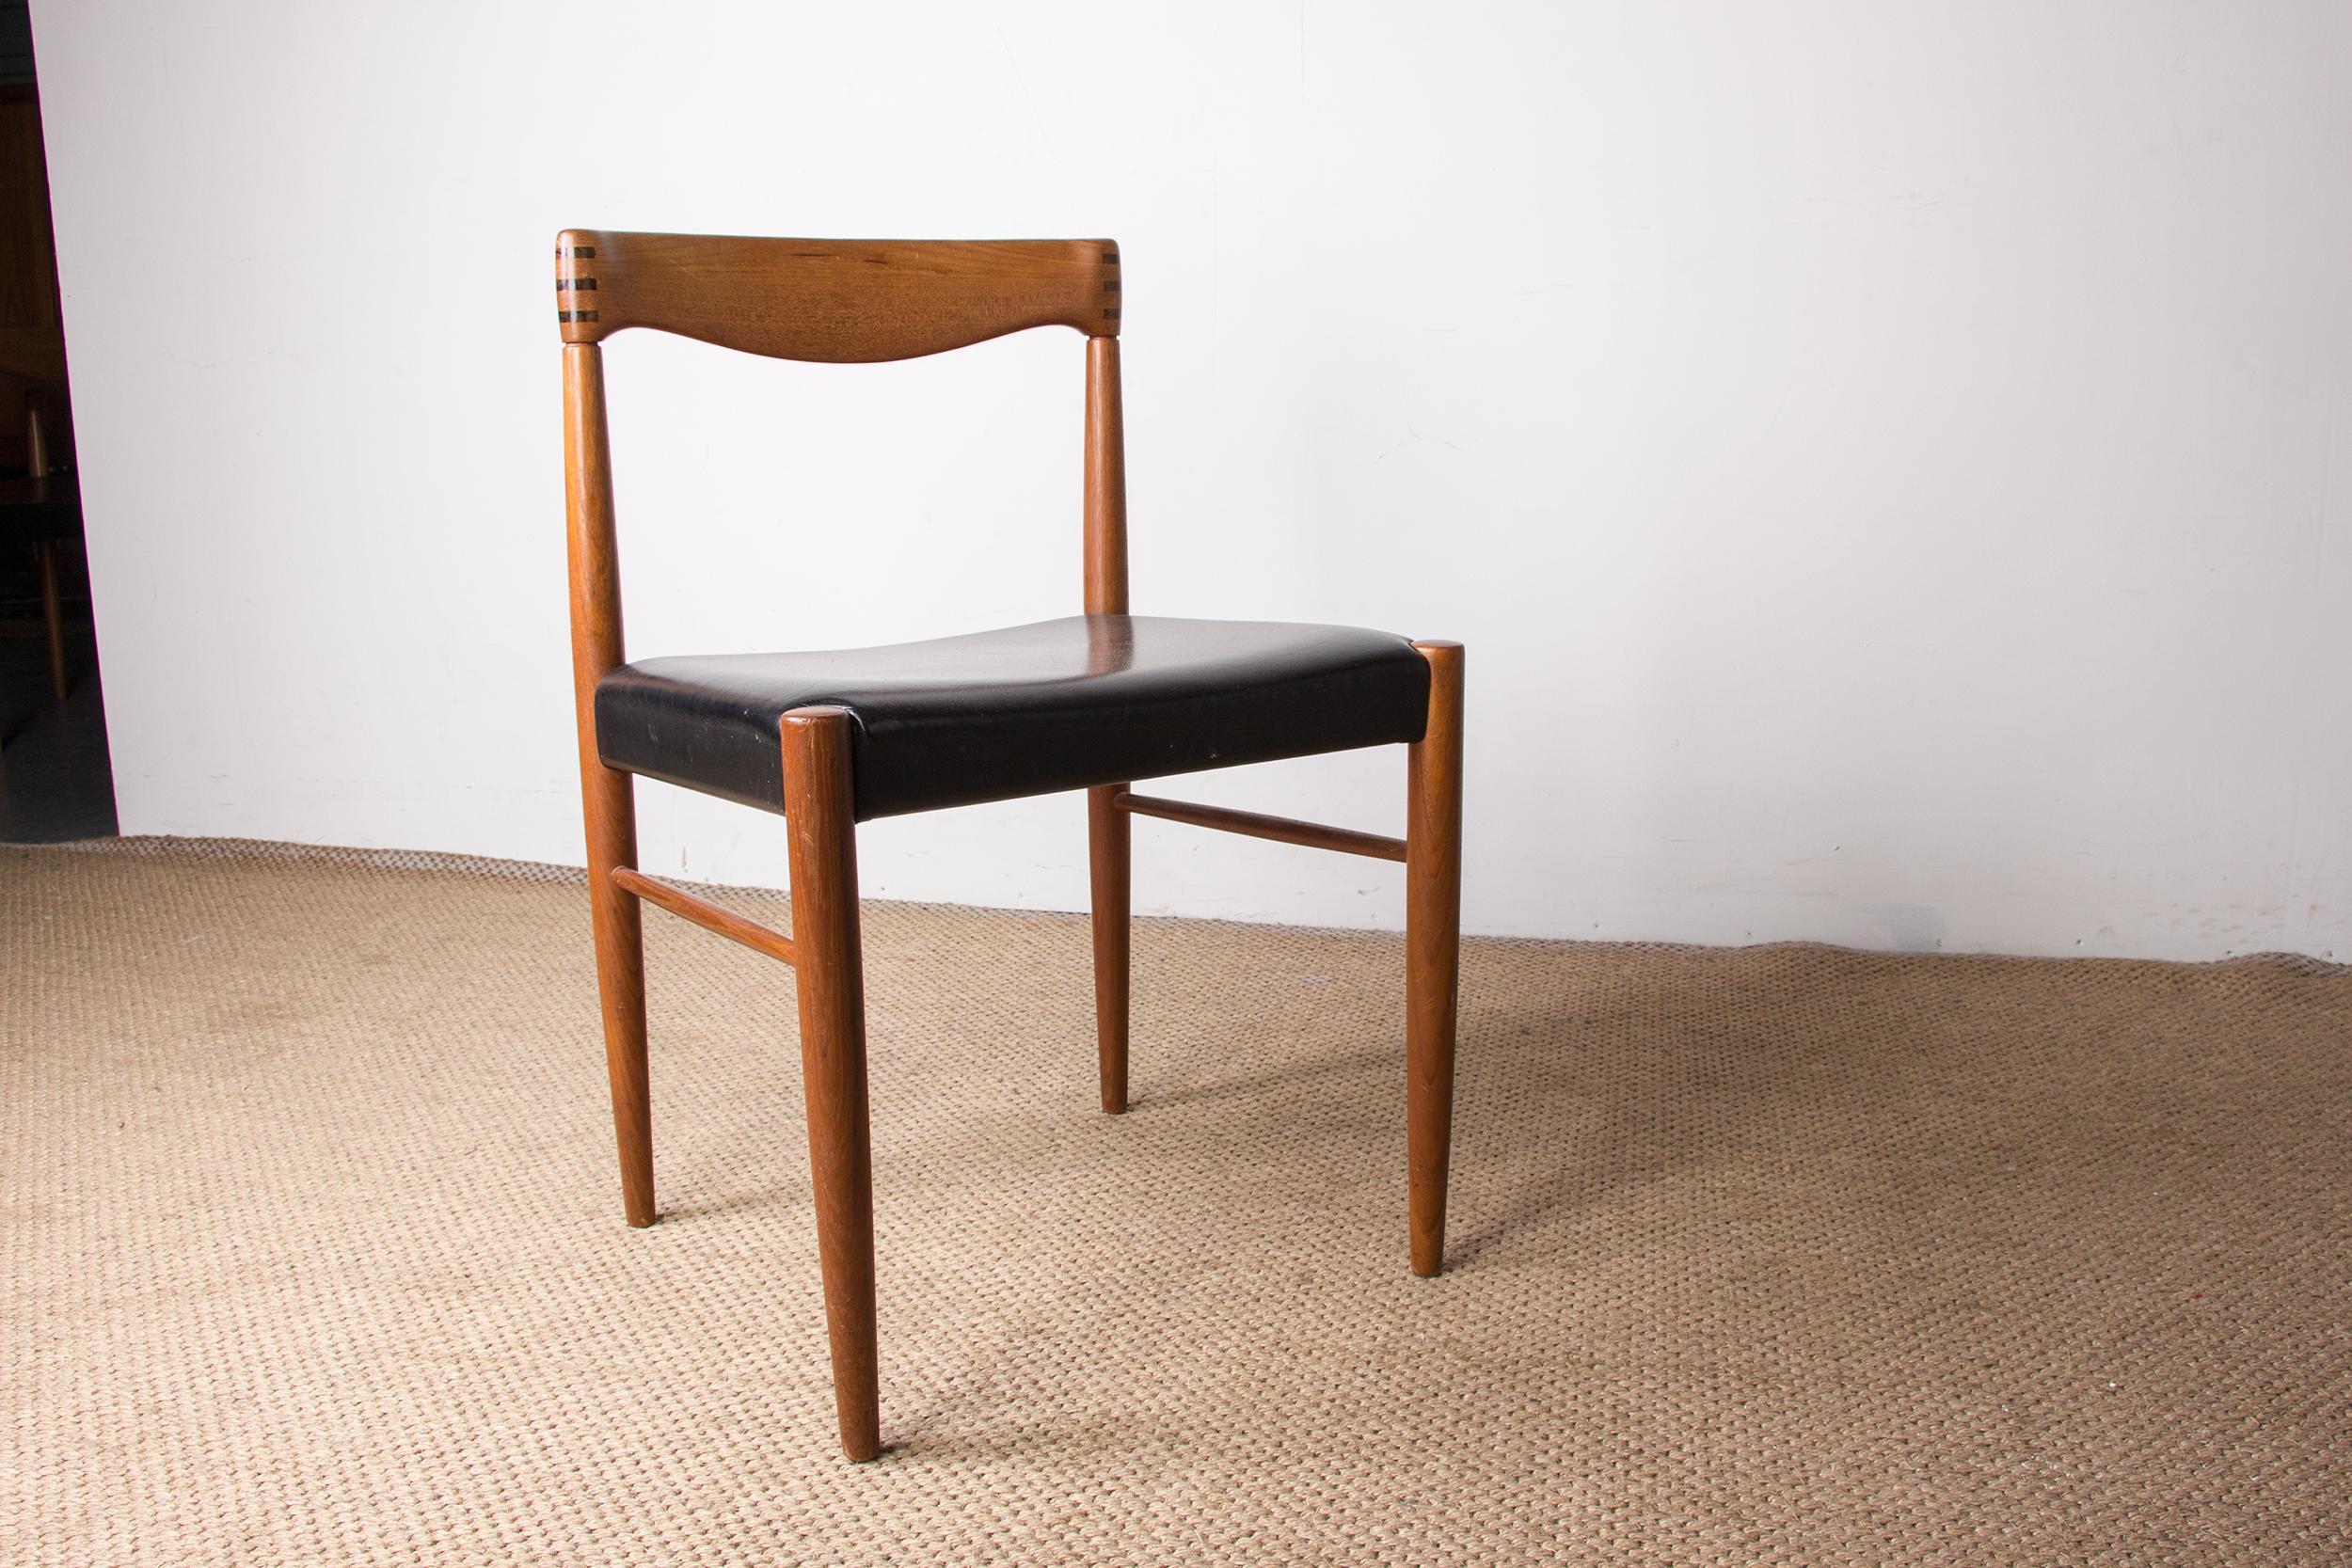 Series of 4 Danish Chairs in Oak and Black Leatherette by Henry Walter Klein for 1